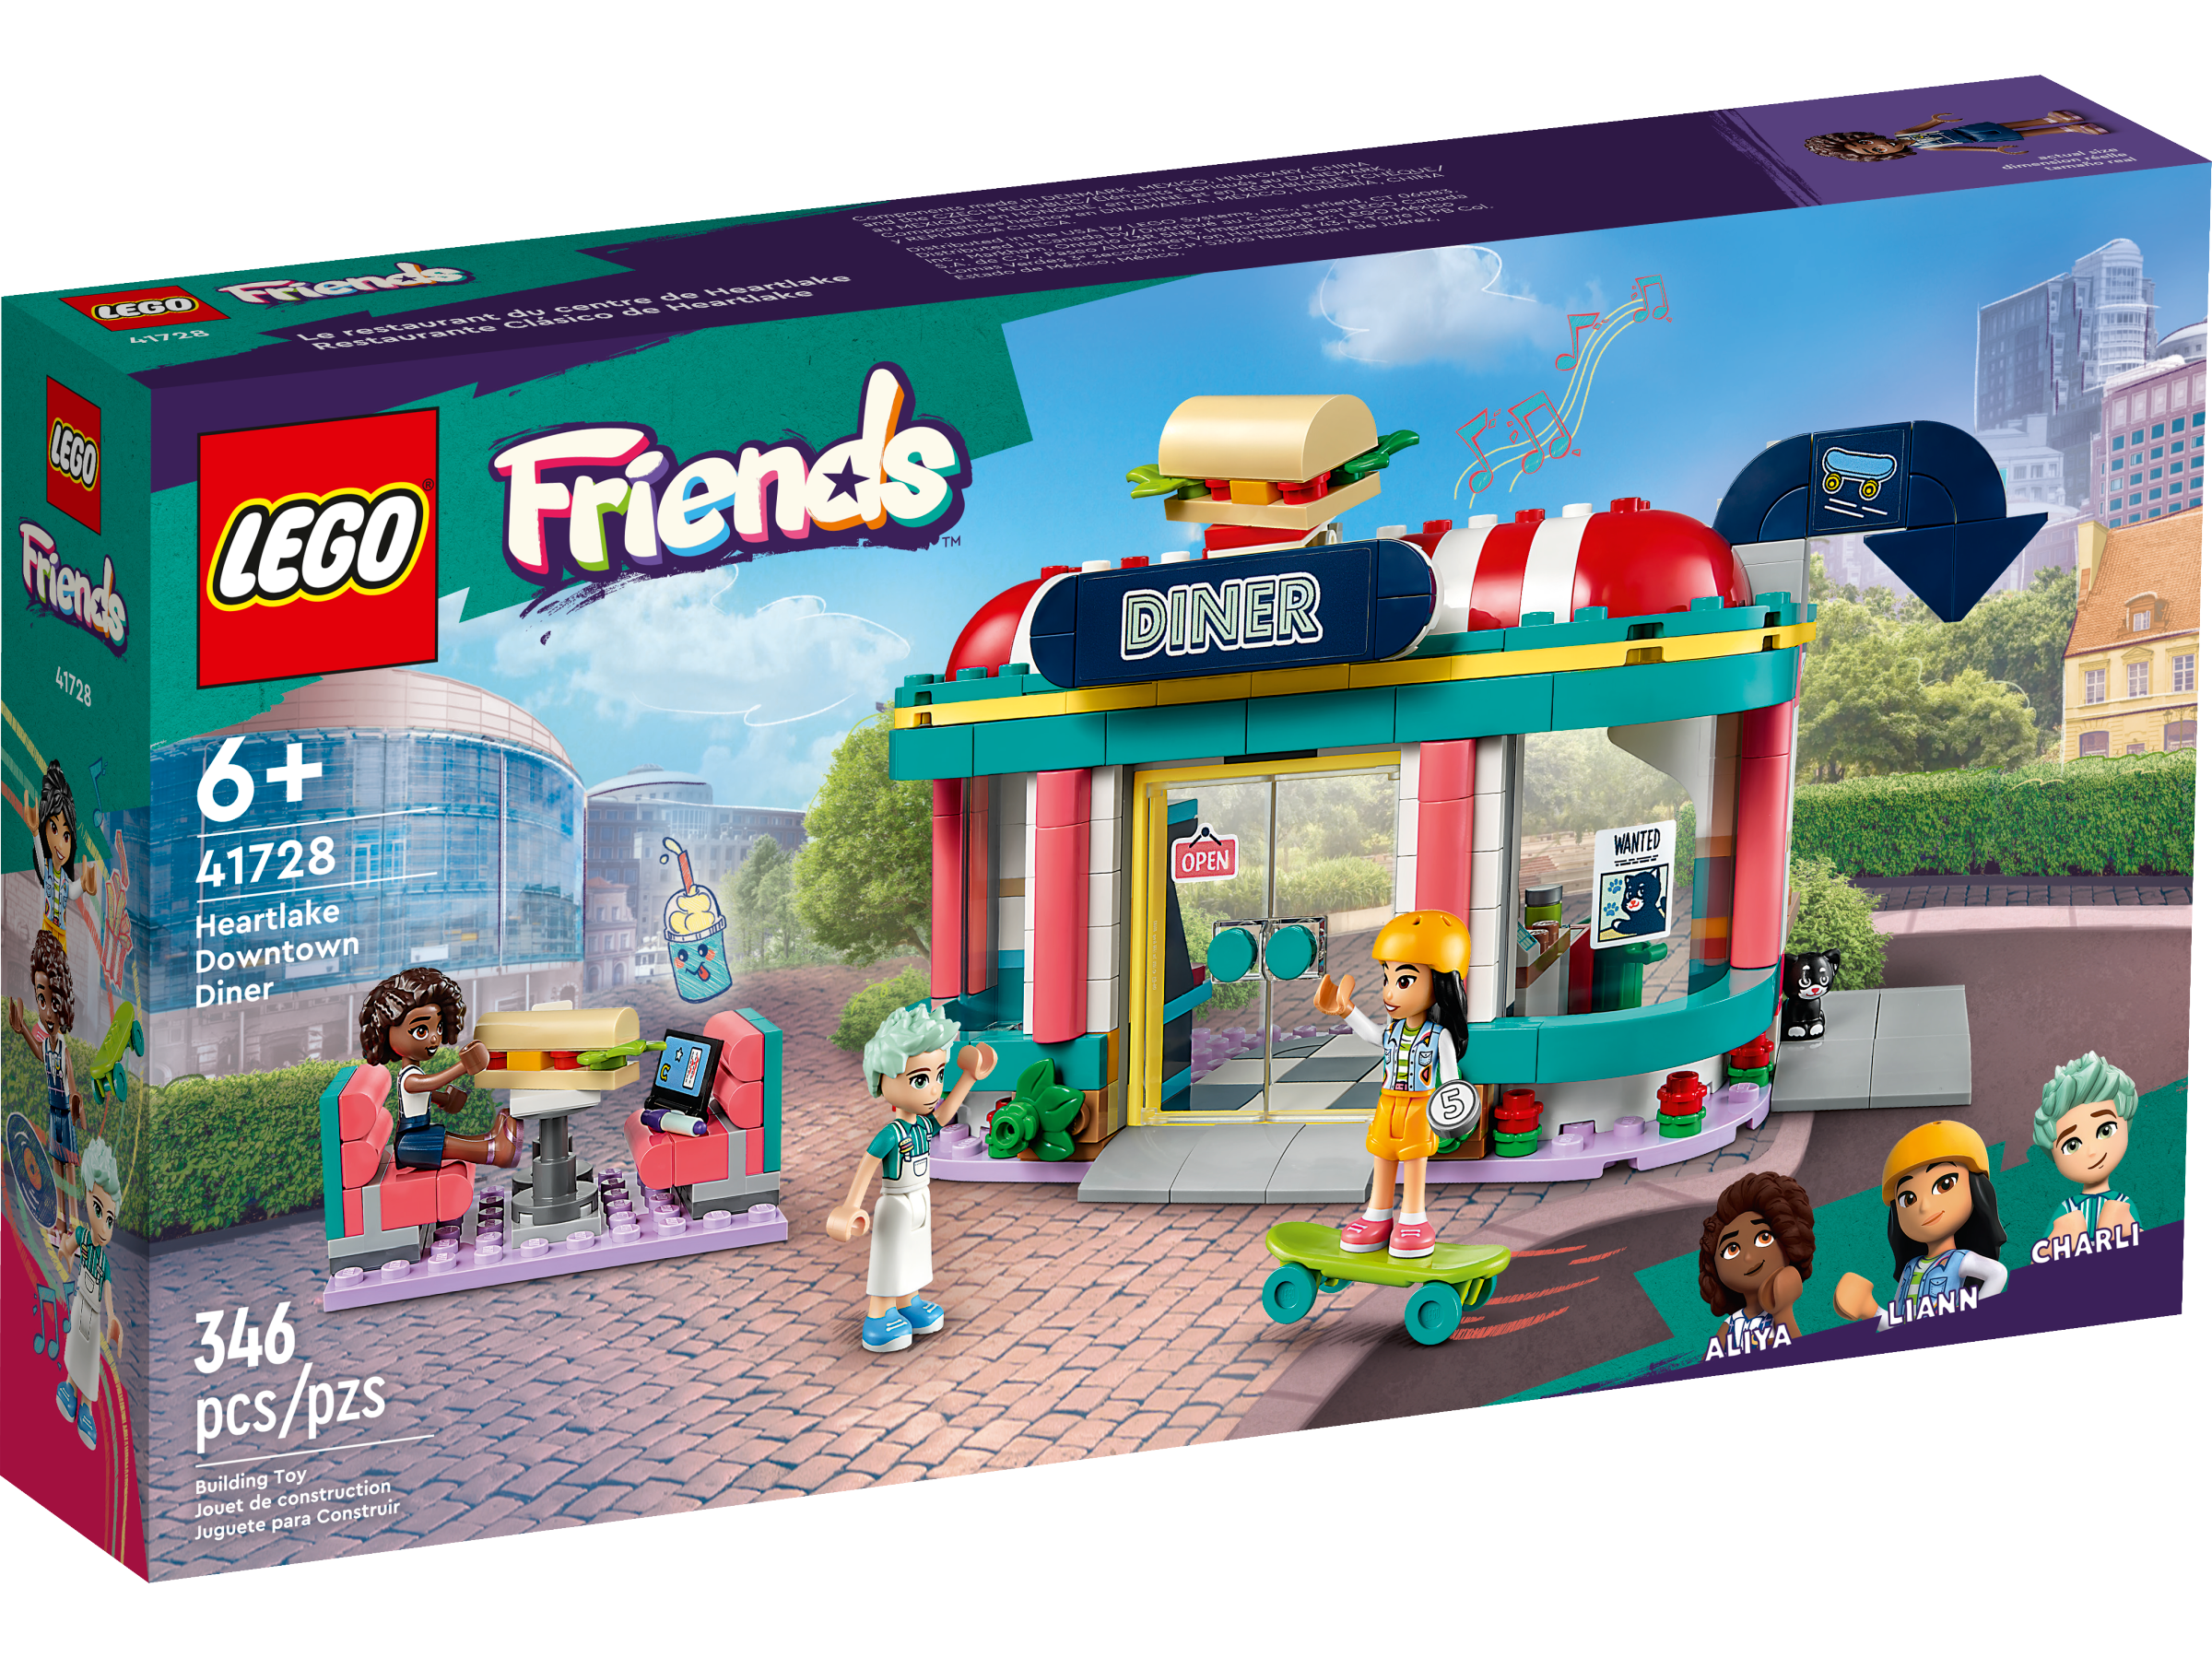 Heartlake Downtown Diner 41728 | Friends | Buy online at the